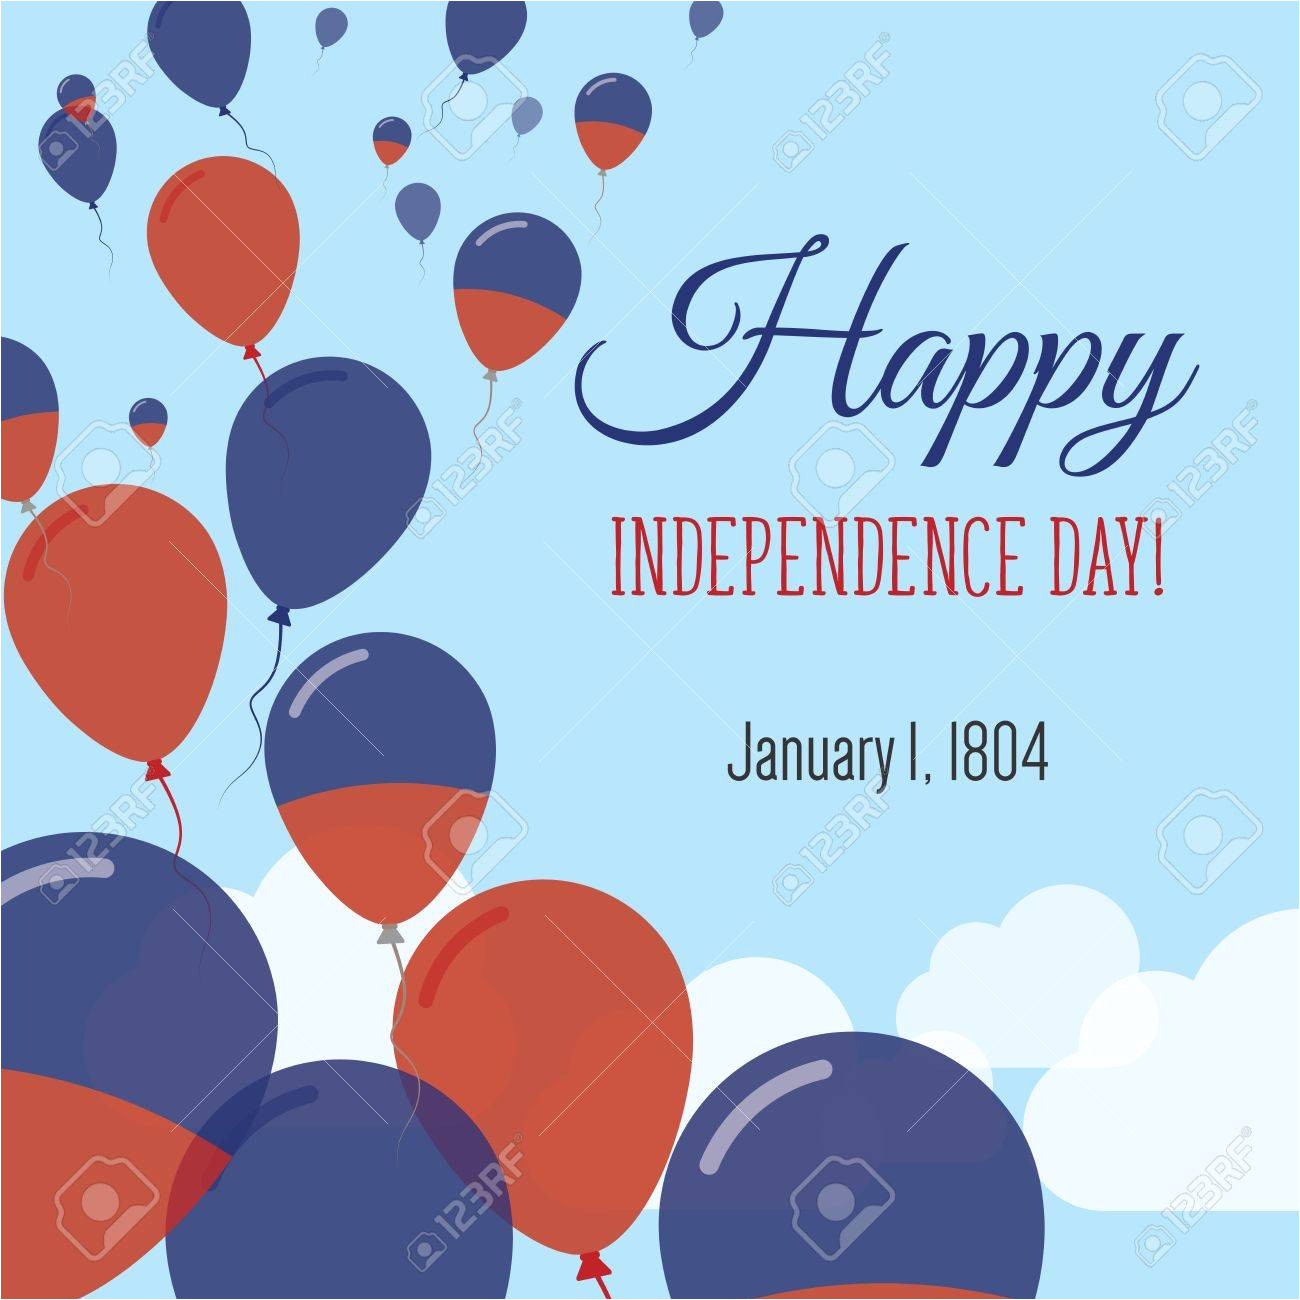 87280768 independence day flat greeting card haiti independence day haitian flag balloons patriotic poster ha jpg